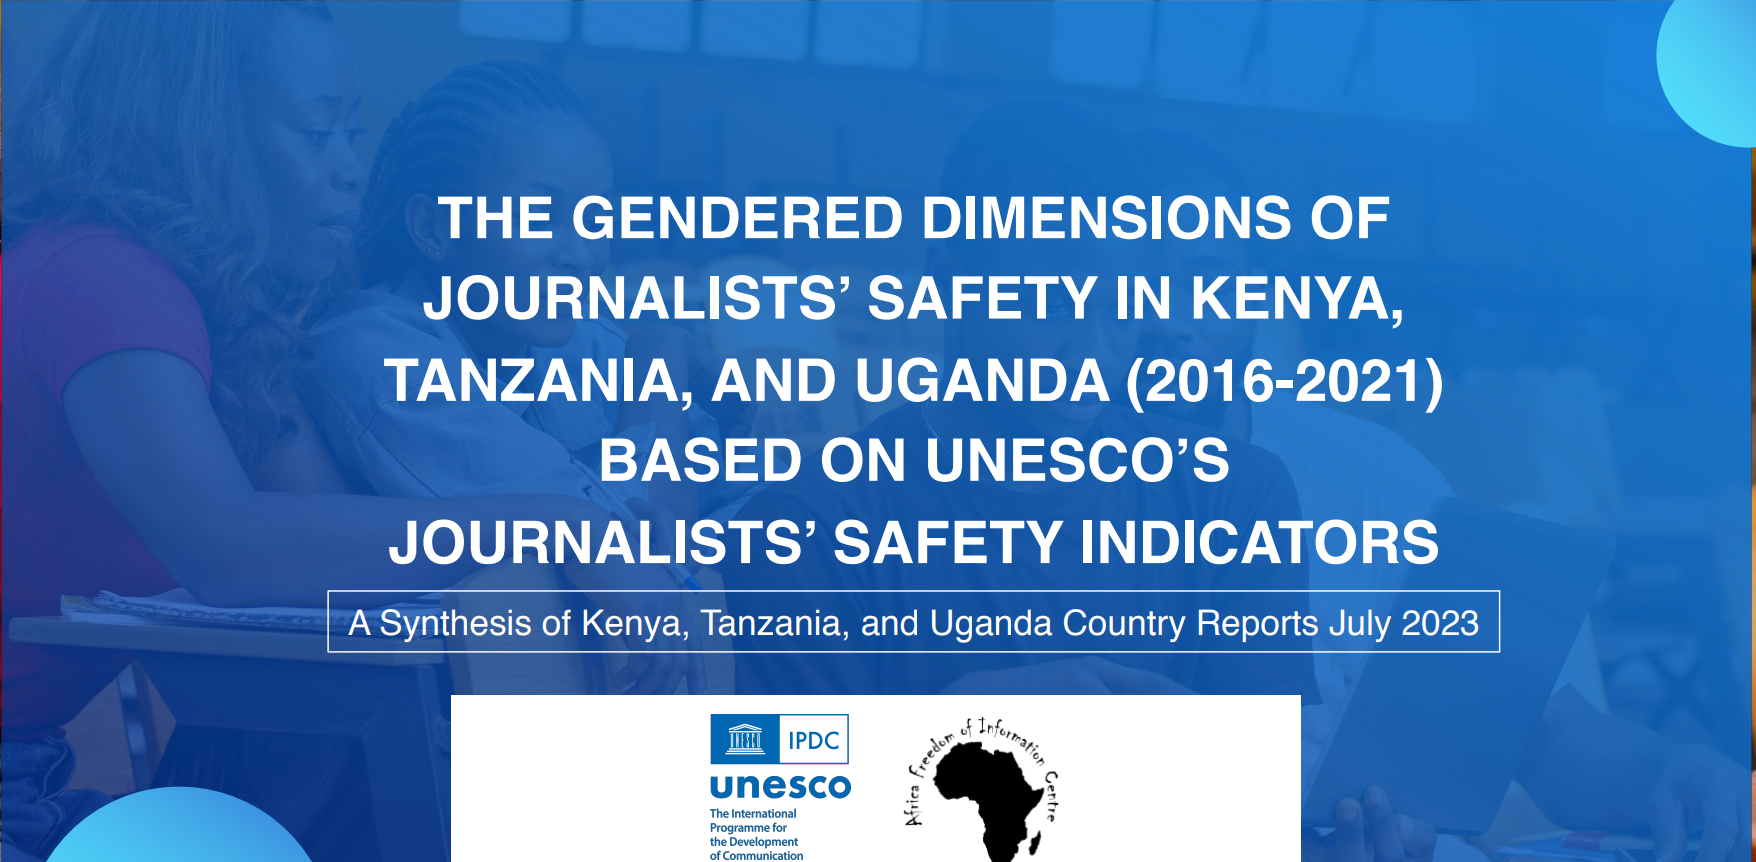 UNESCO indicators unveil Gendered Realities of Journalists’ Safety in East Africa